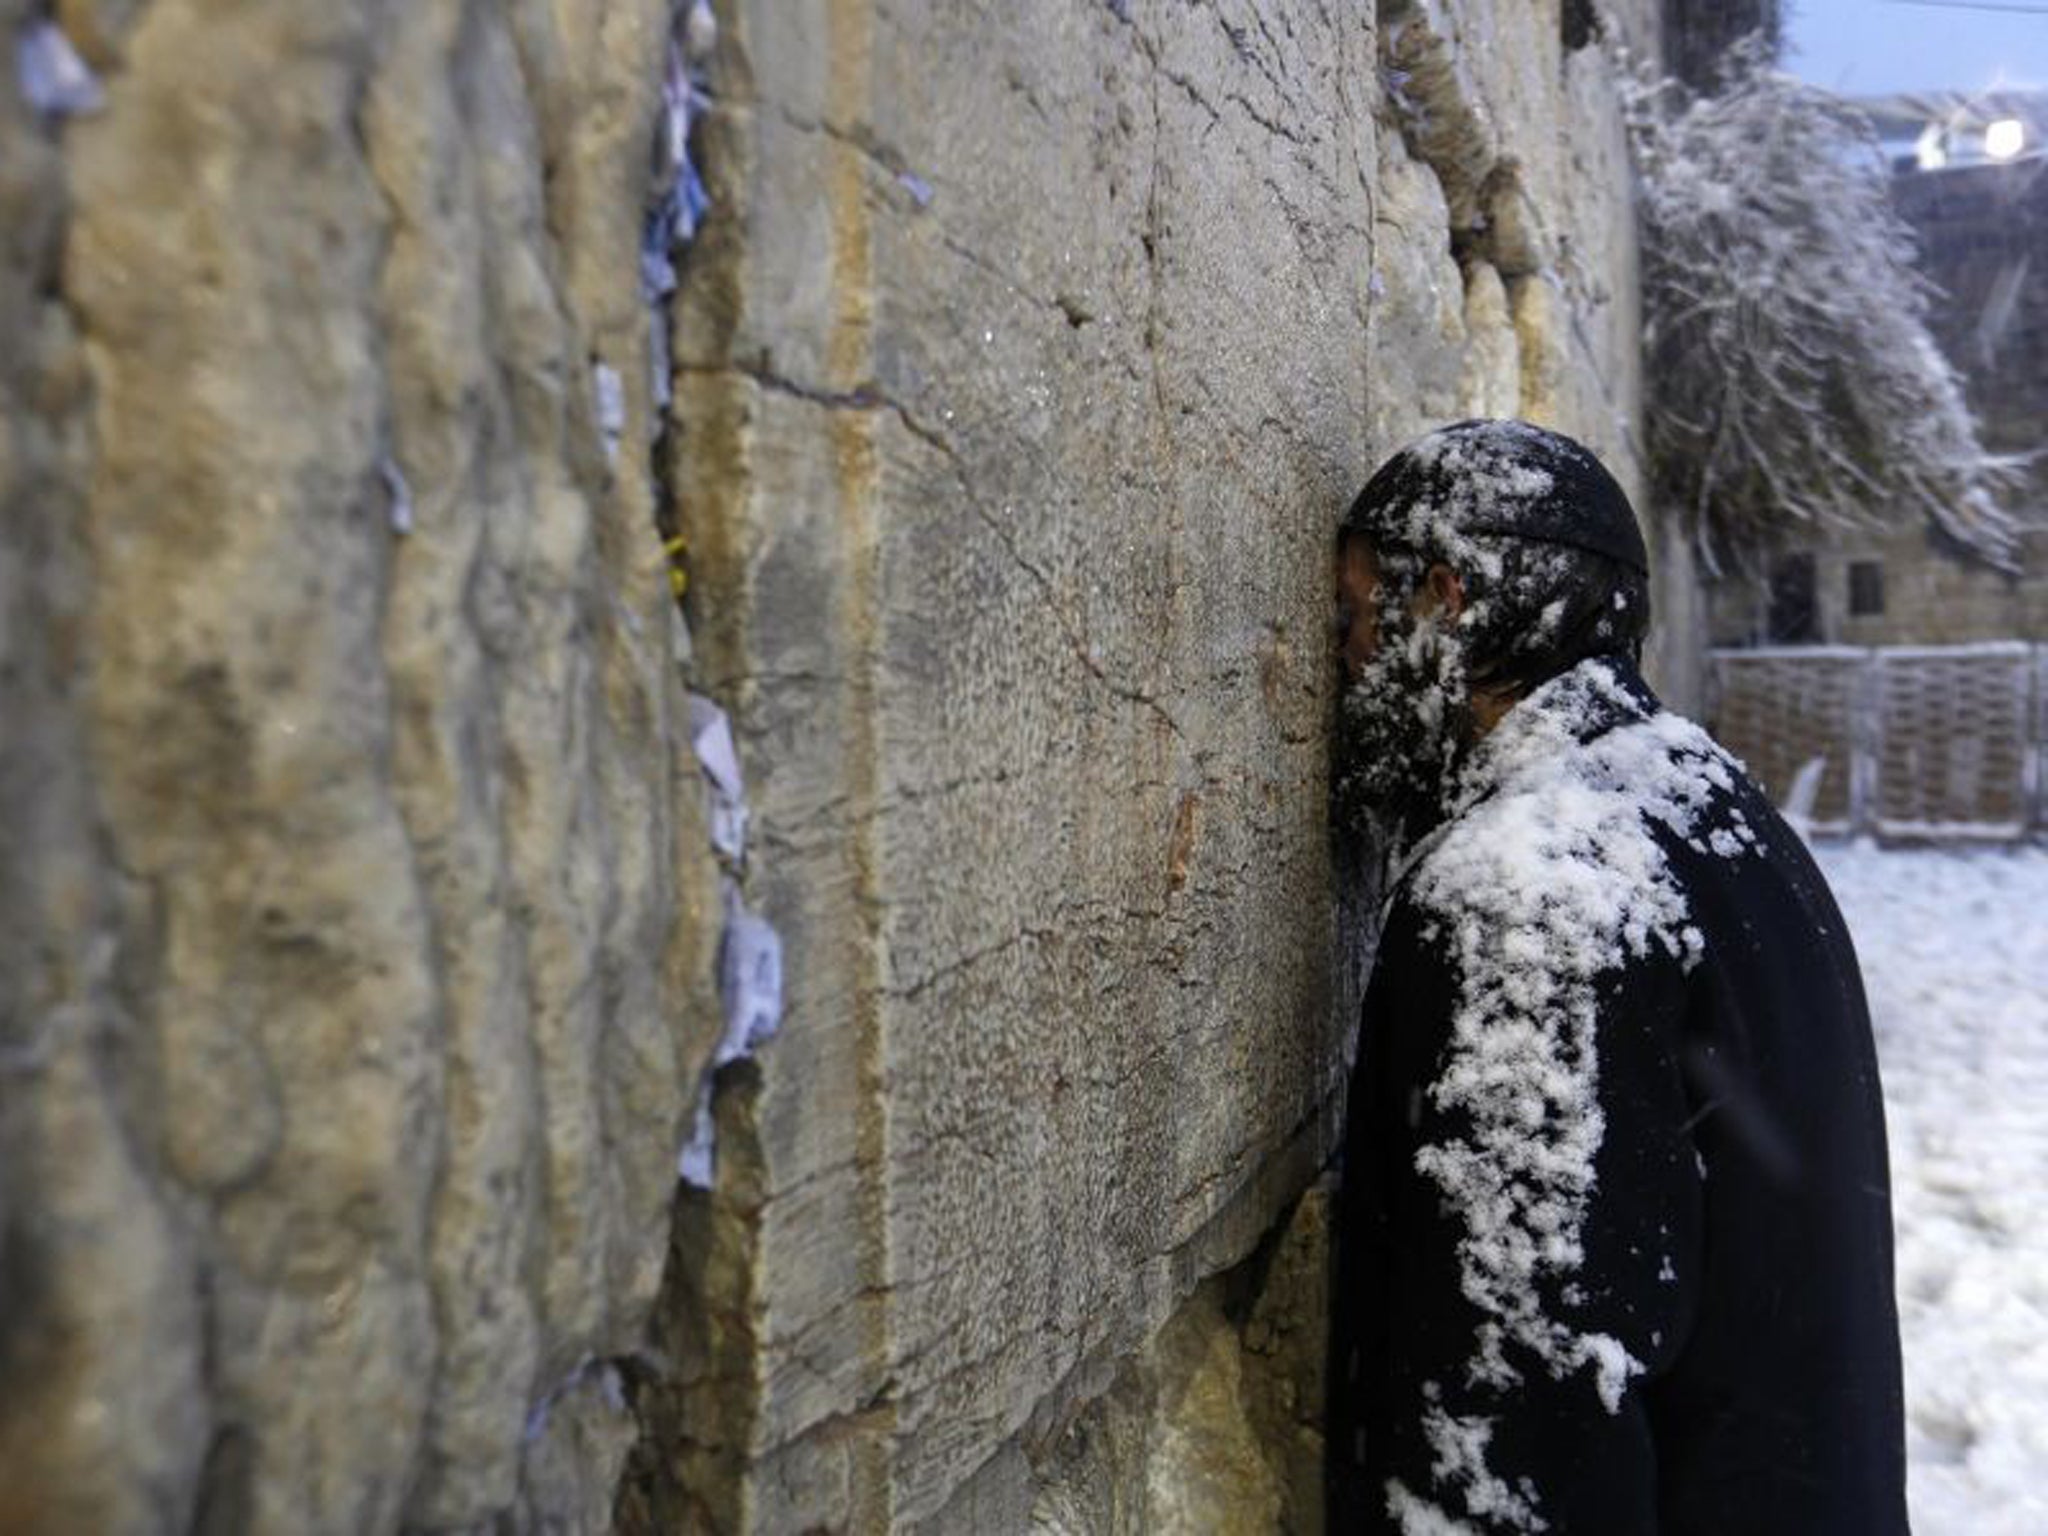 An Ultra-Orthodox Jewish man prays at the Western Wall in Jerusalem's Old City during a snowstorm on 13 December 2013